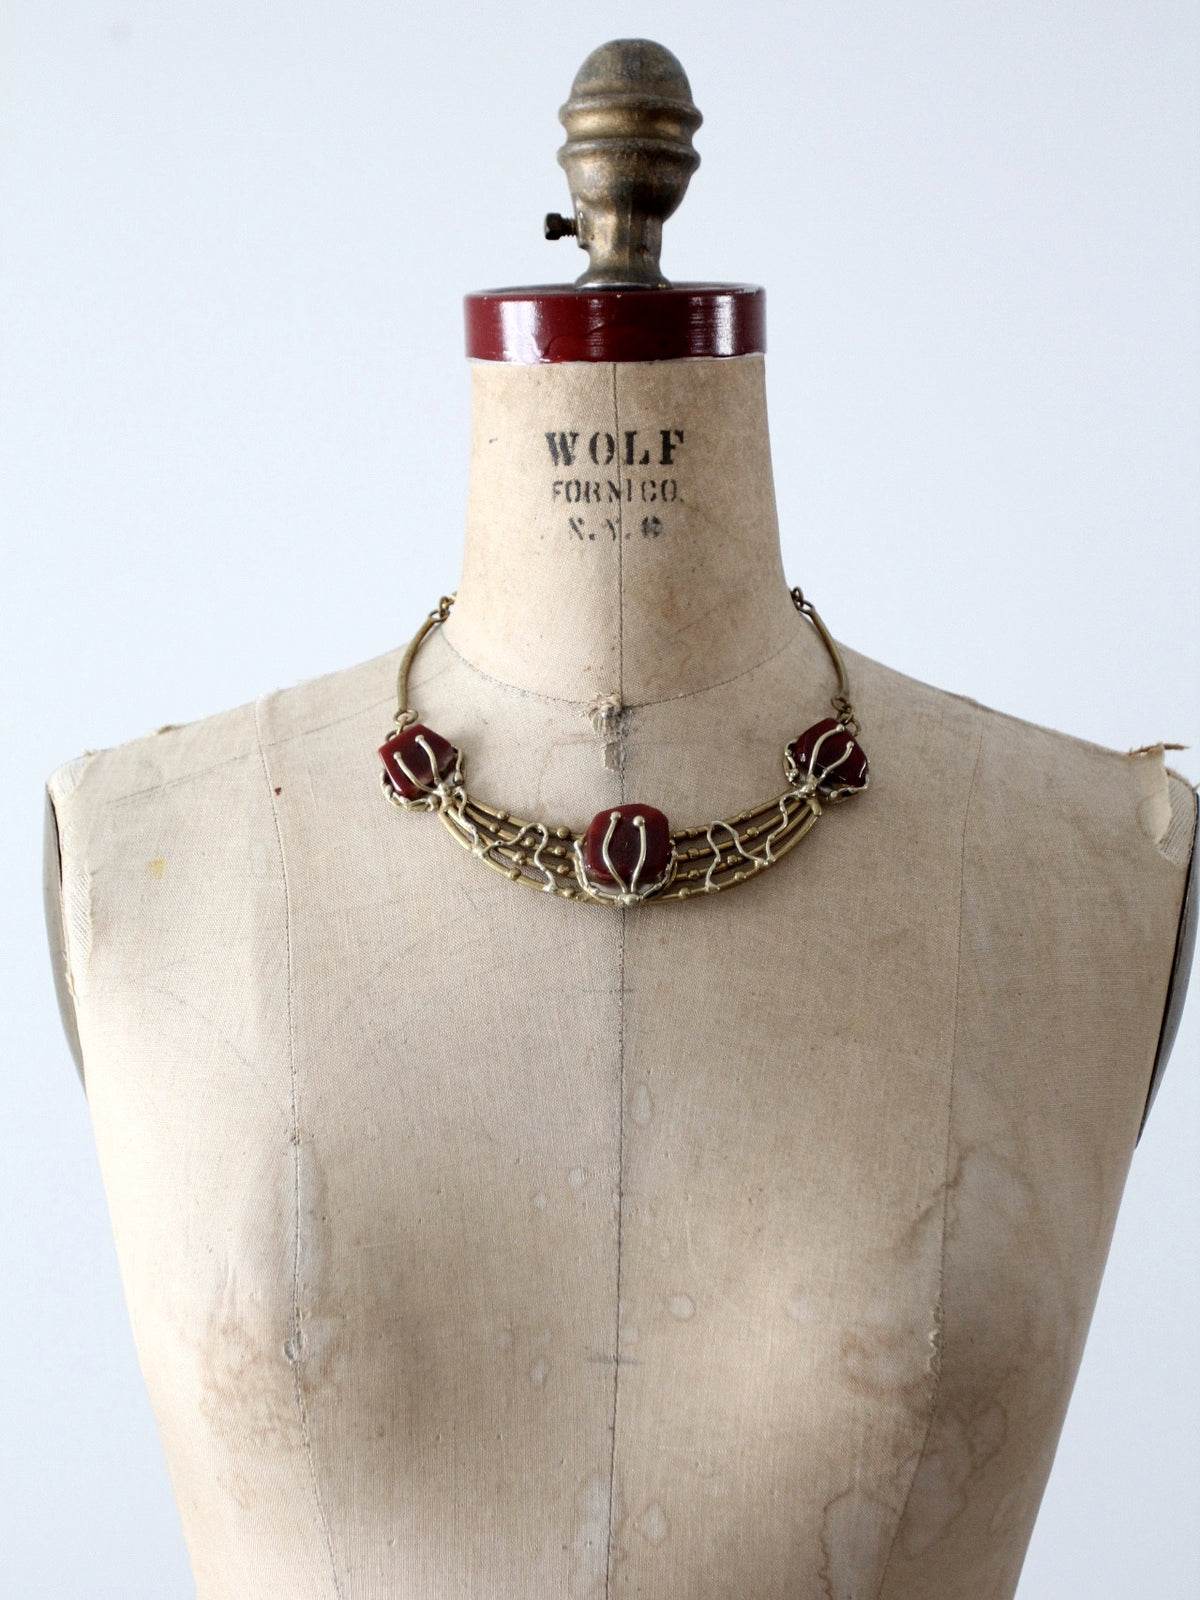 vintage 60s brutalist necklace with stone insets